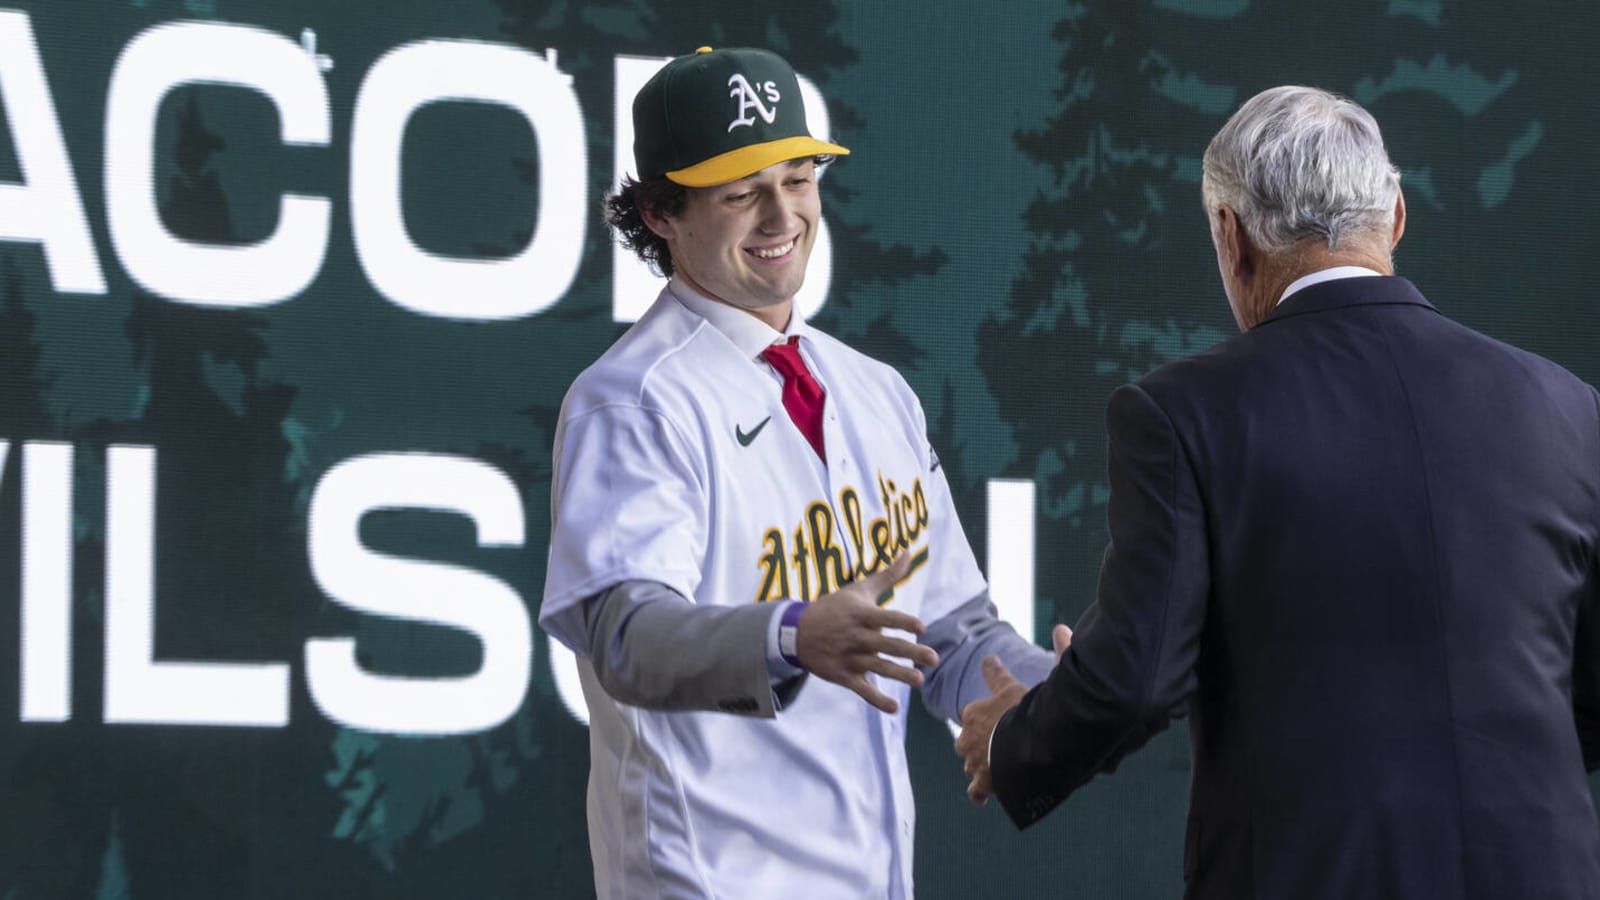 MLB Draft littered with family legacies